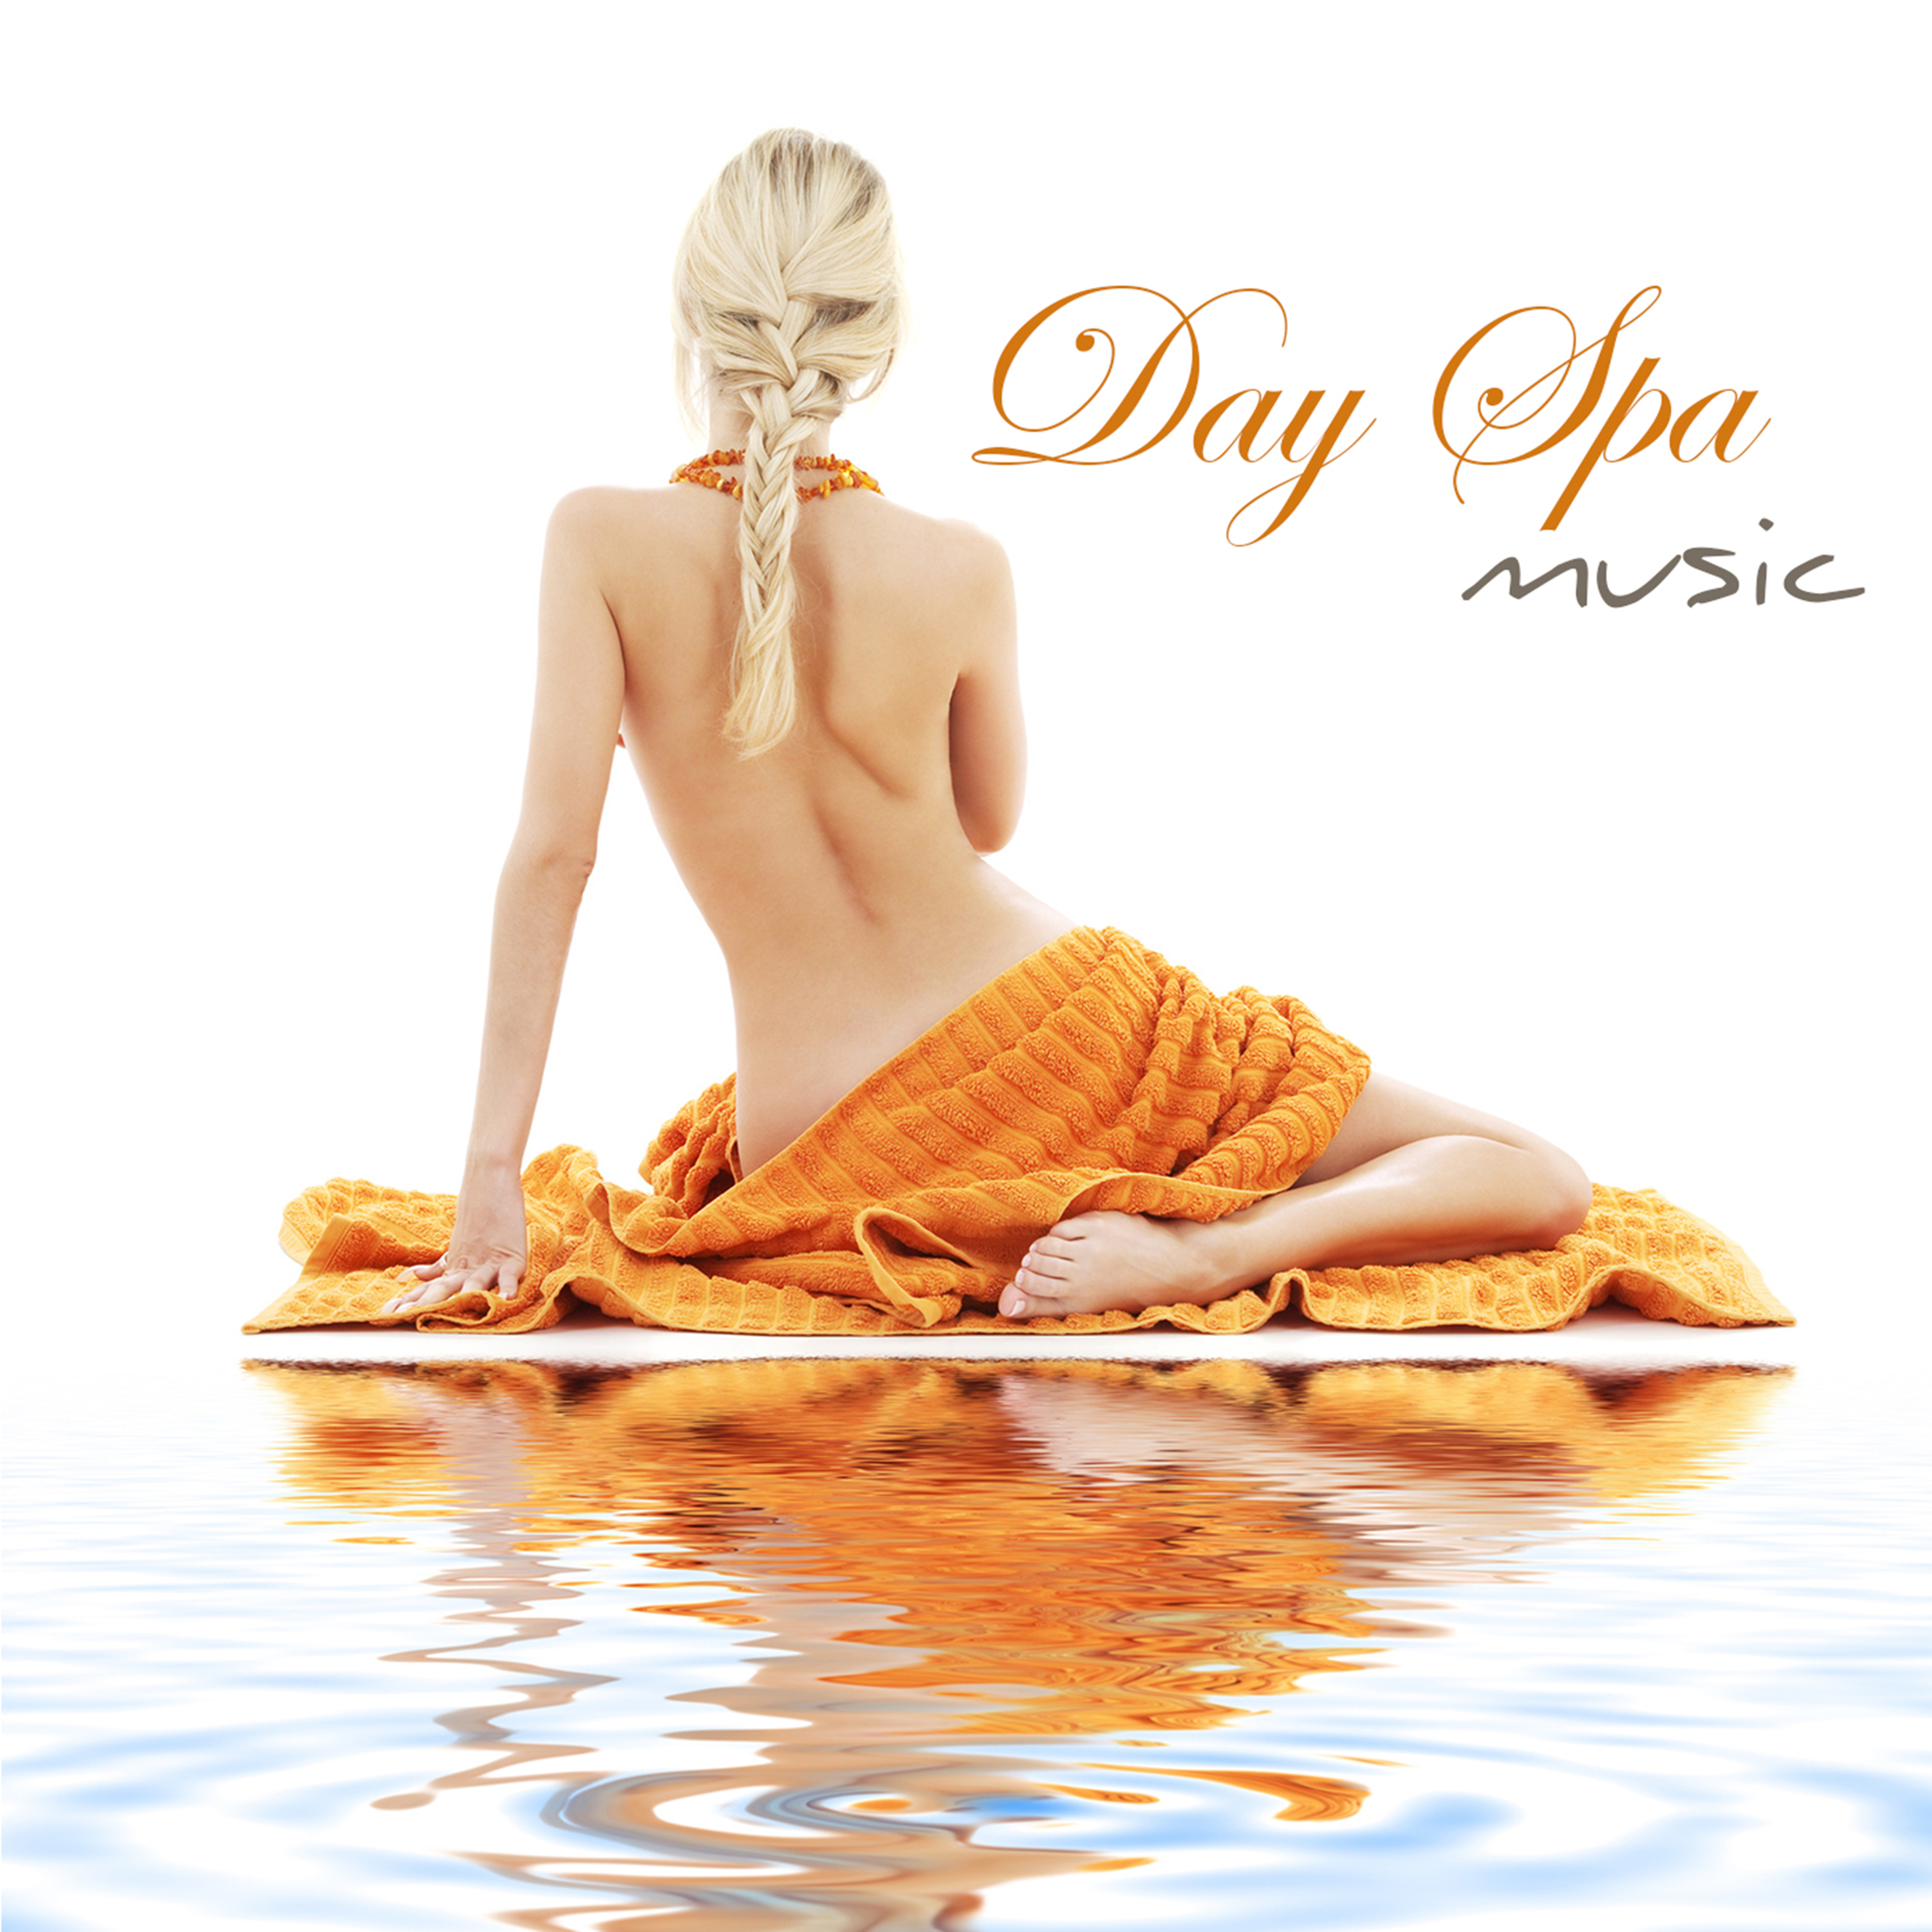 Day Spa Music Chill Out Relaxation – Soothing and Relaxing Nature Music for Spa Day, Spa Treatments in Luxury Spa & Health Spa